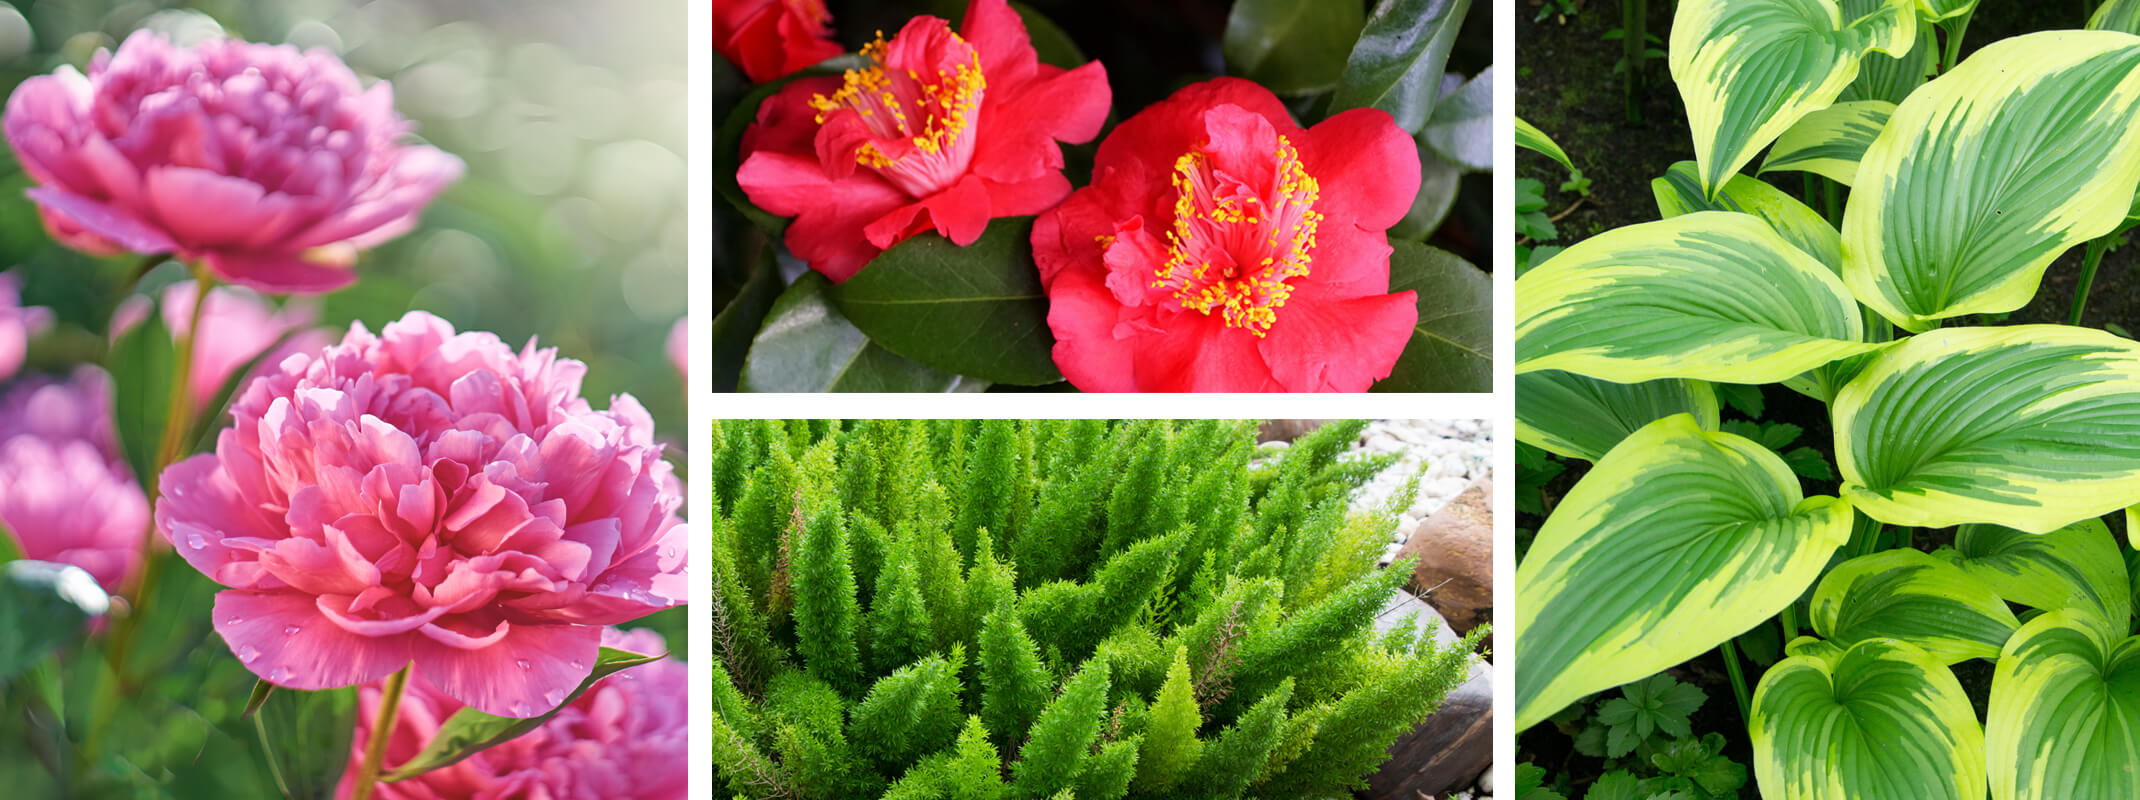 Collage of plants that love shade starting with pink peonies, then red camellias, below that image is an image of a foxtail fern and far right is a hosta